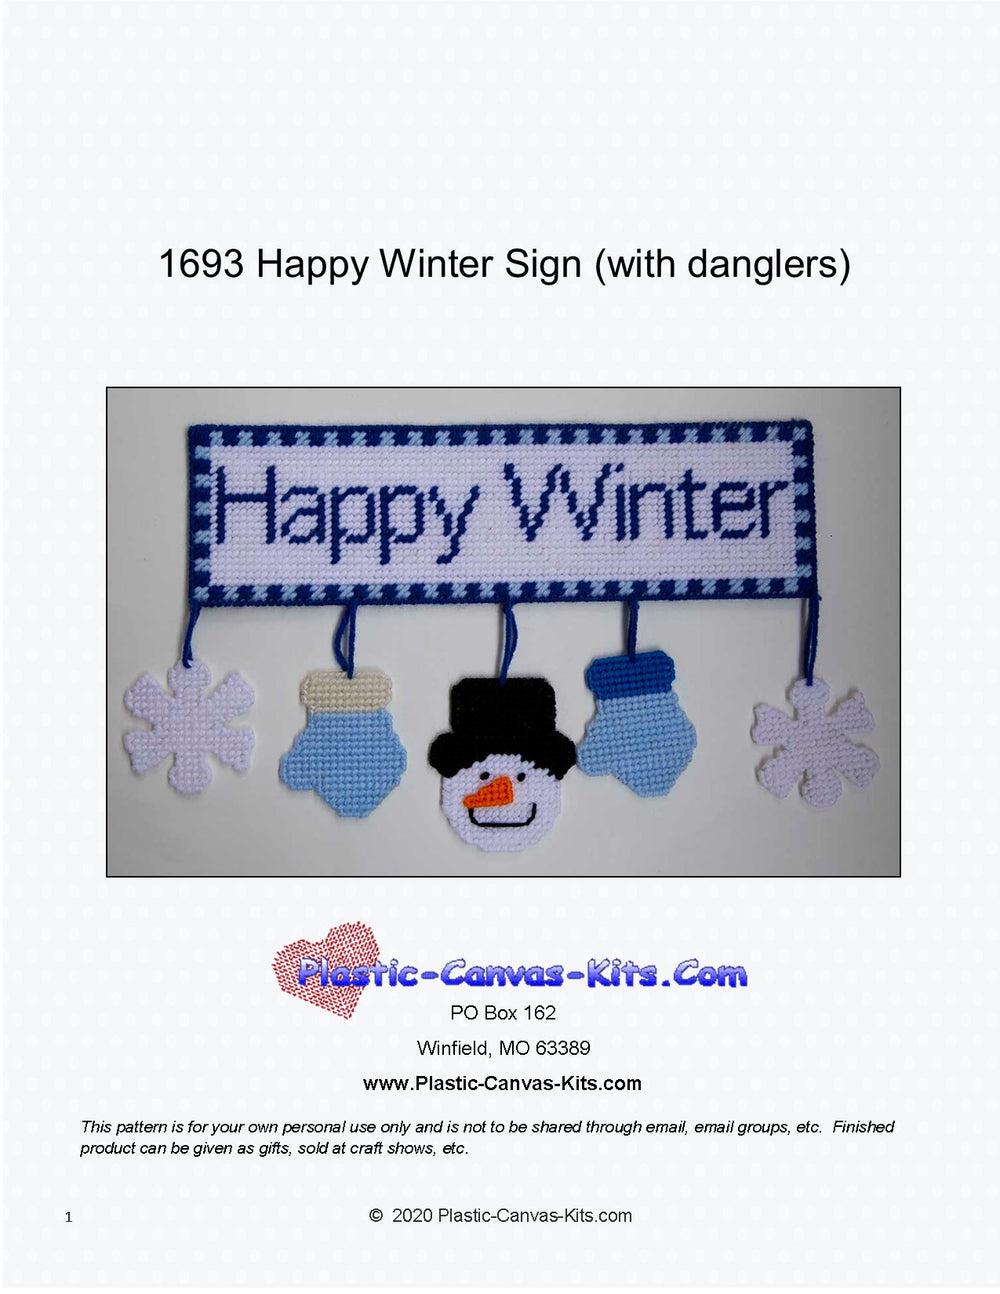 Happy Winter with Danglers